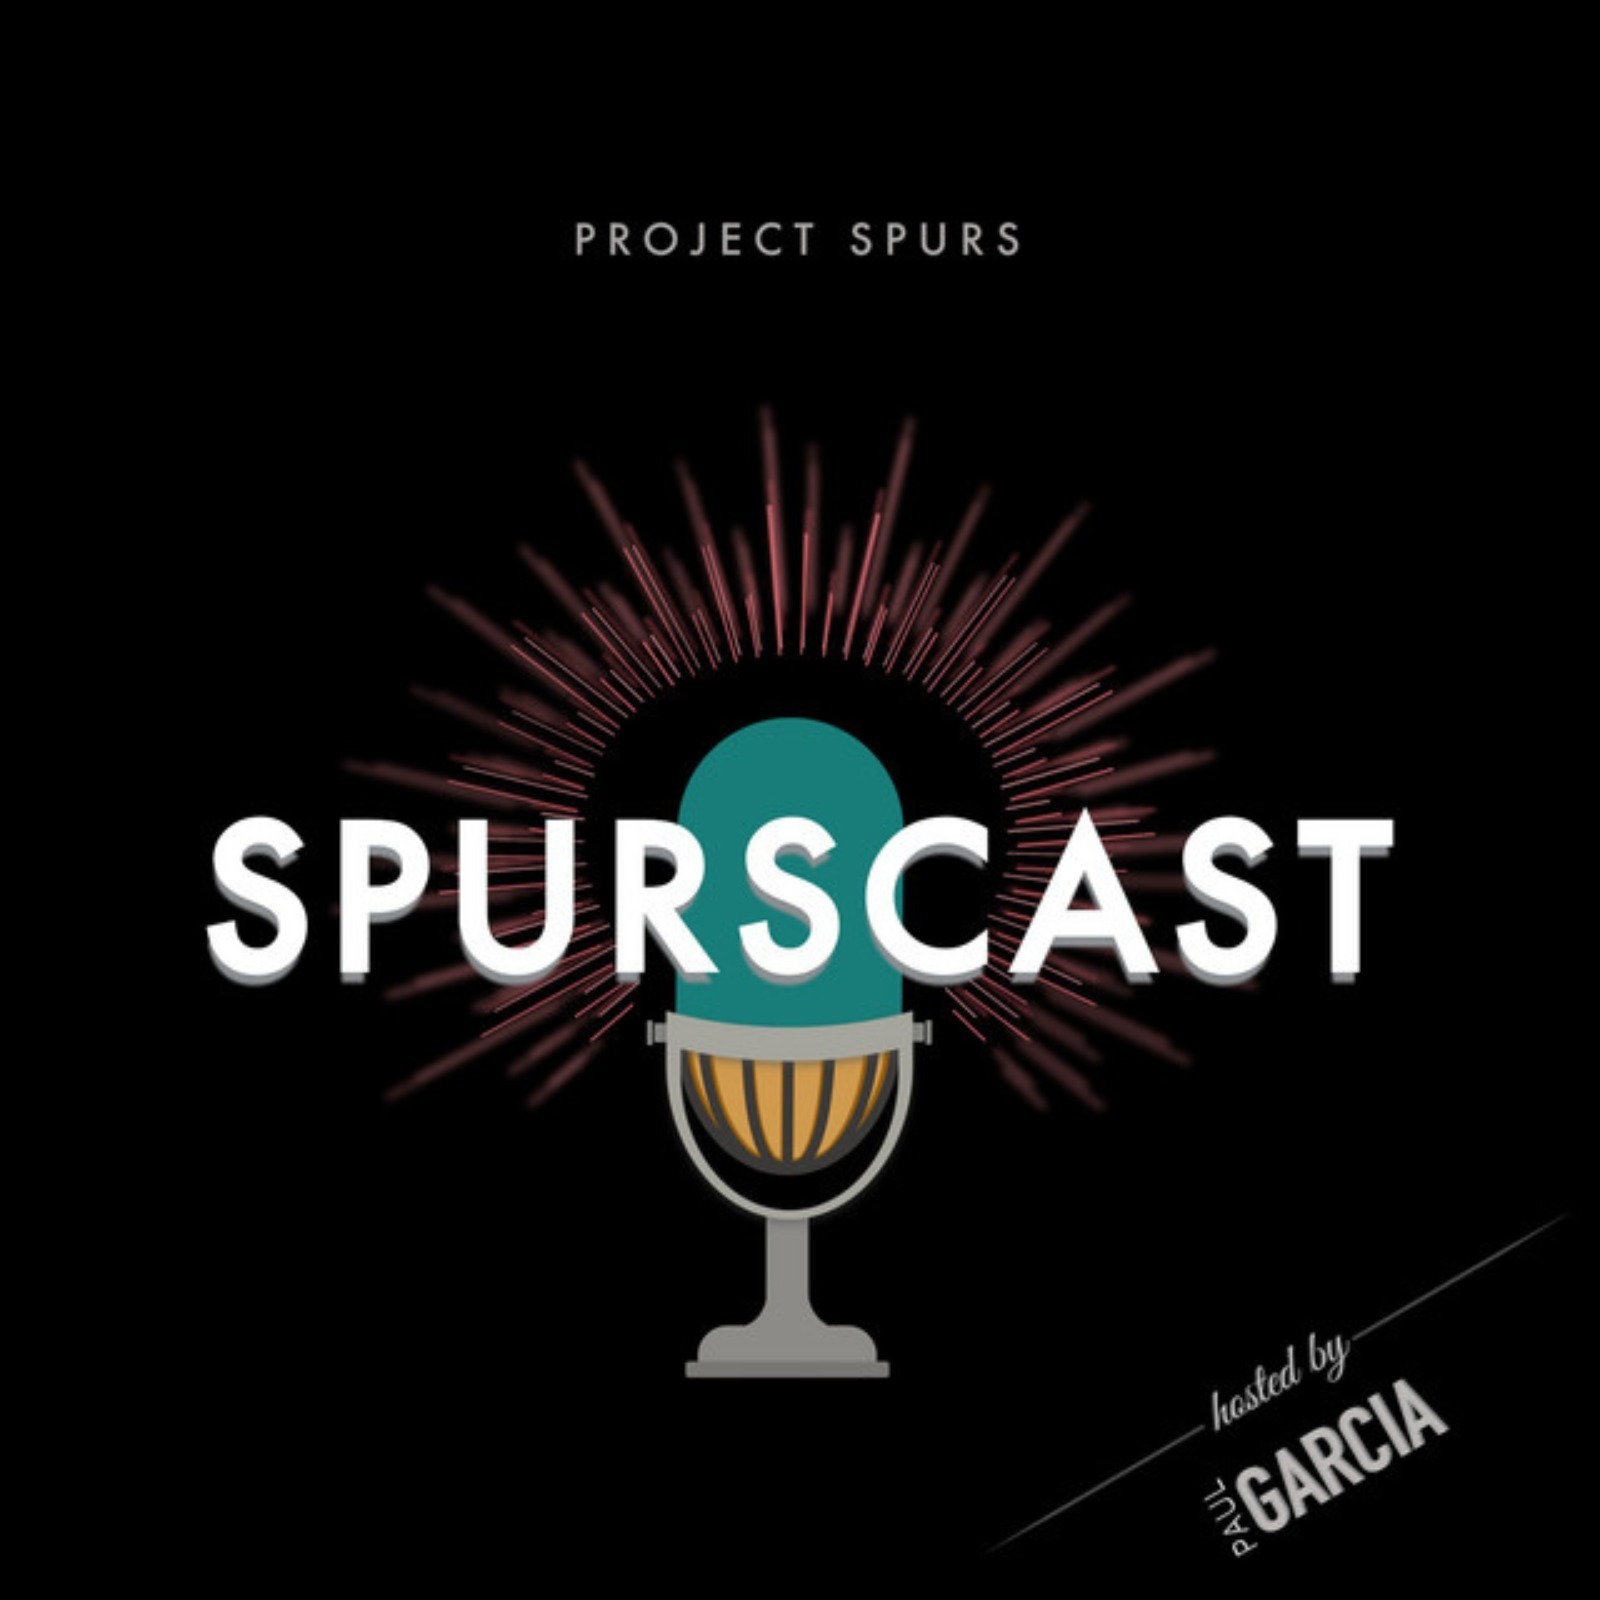 Spurscast Ep. 732: Spurs Discussed Trae Young Trade with Hawks?